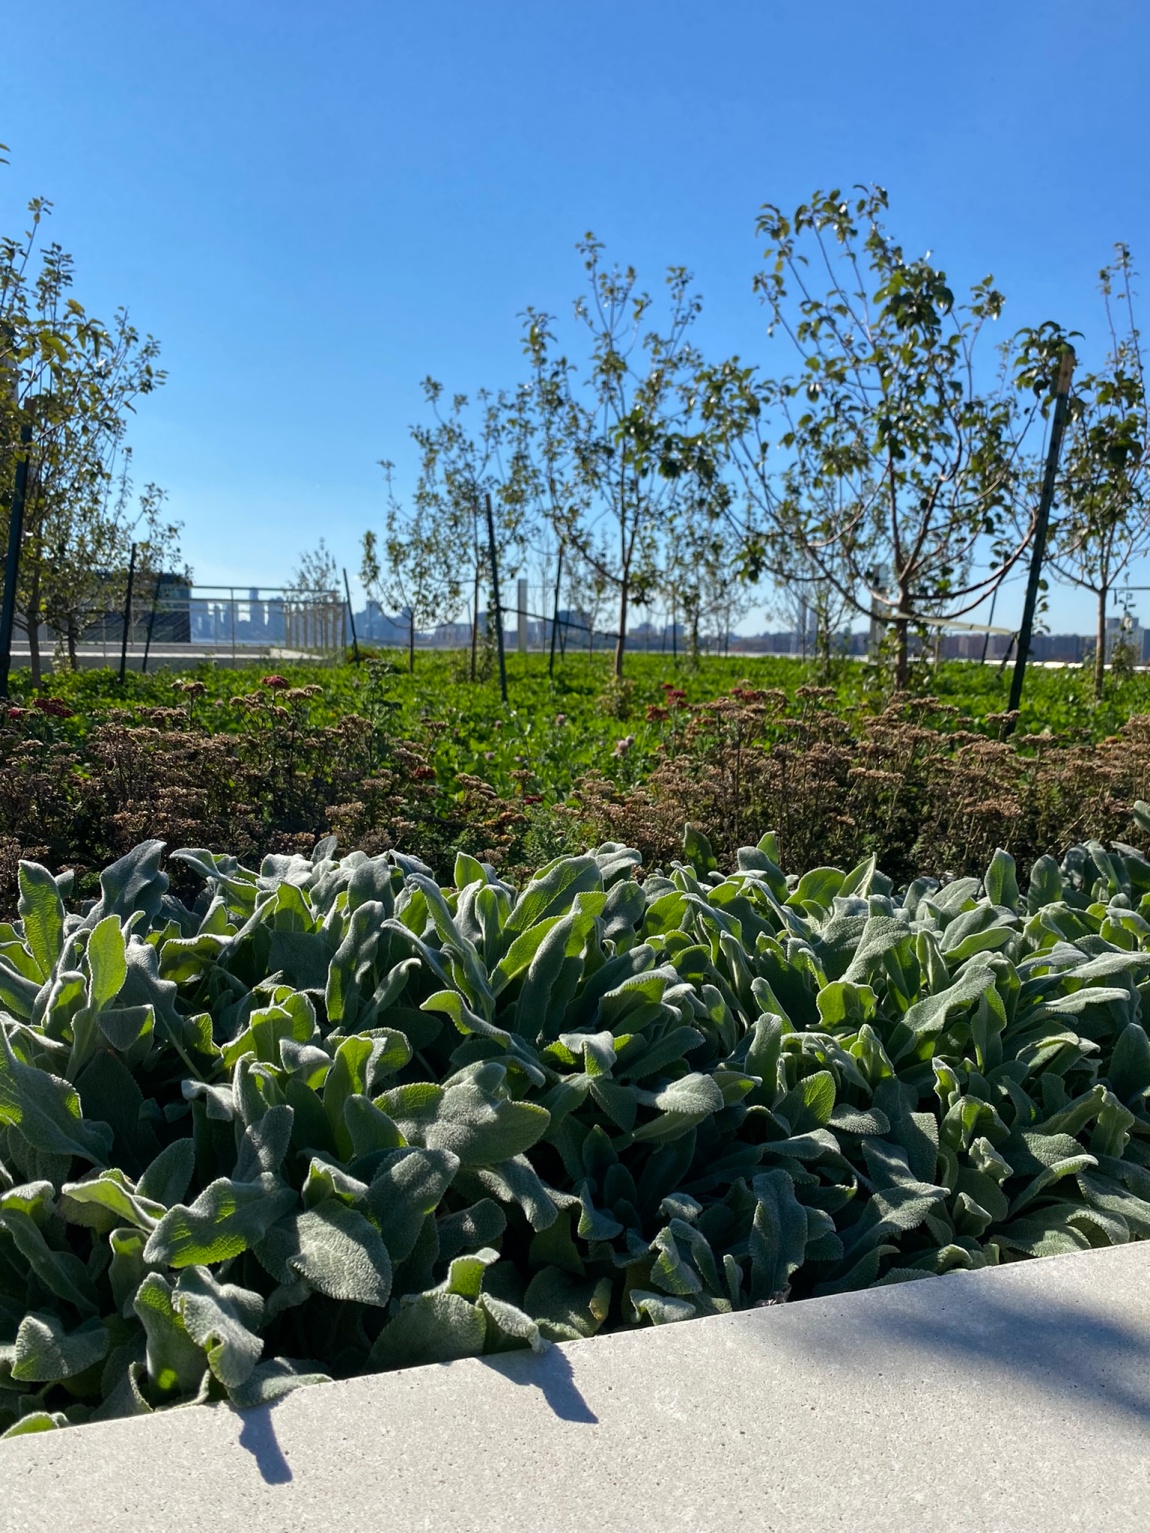 Javits Center Expansion Rooftop & Farm New York